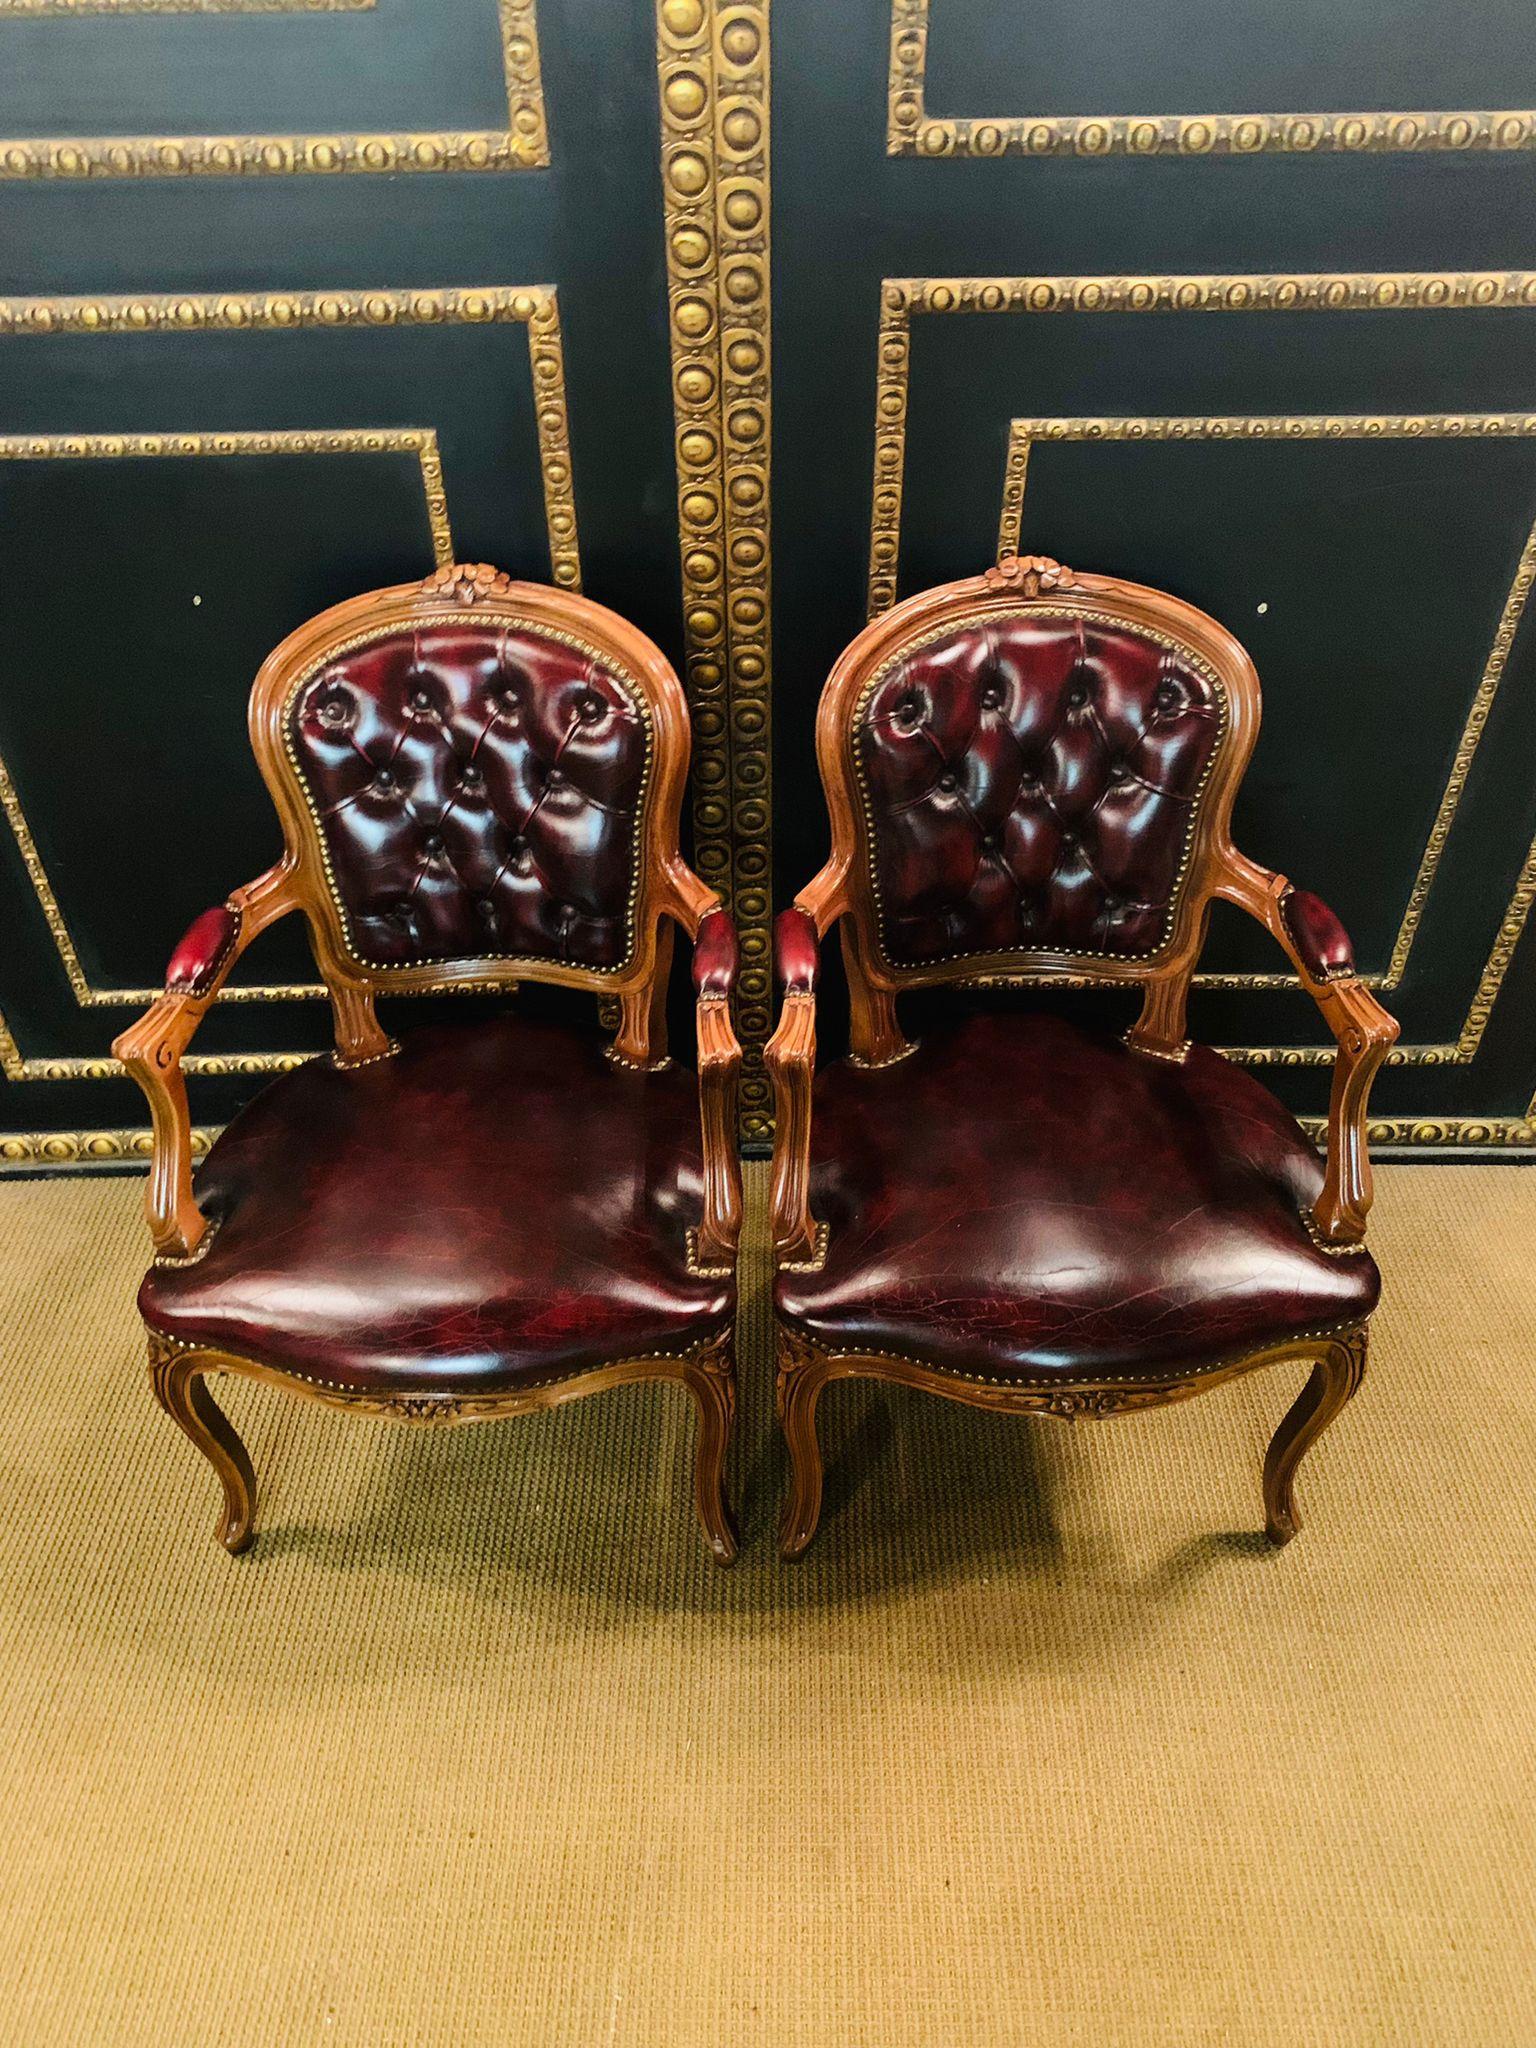 We are delighted to offer you this stunning pair of Chesterfield carver armchairs in oxblood leather with hand carved frames. The chairs are a lovely find and in original condition throughout, both are buttoned and look glorious from every angle